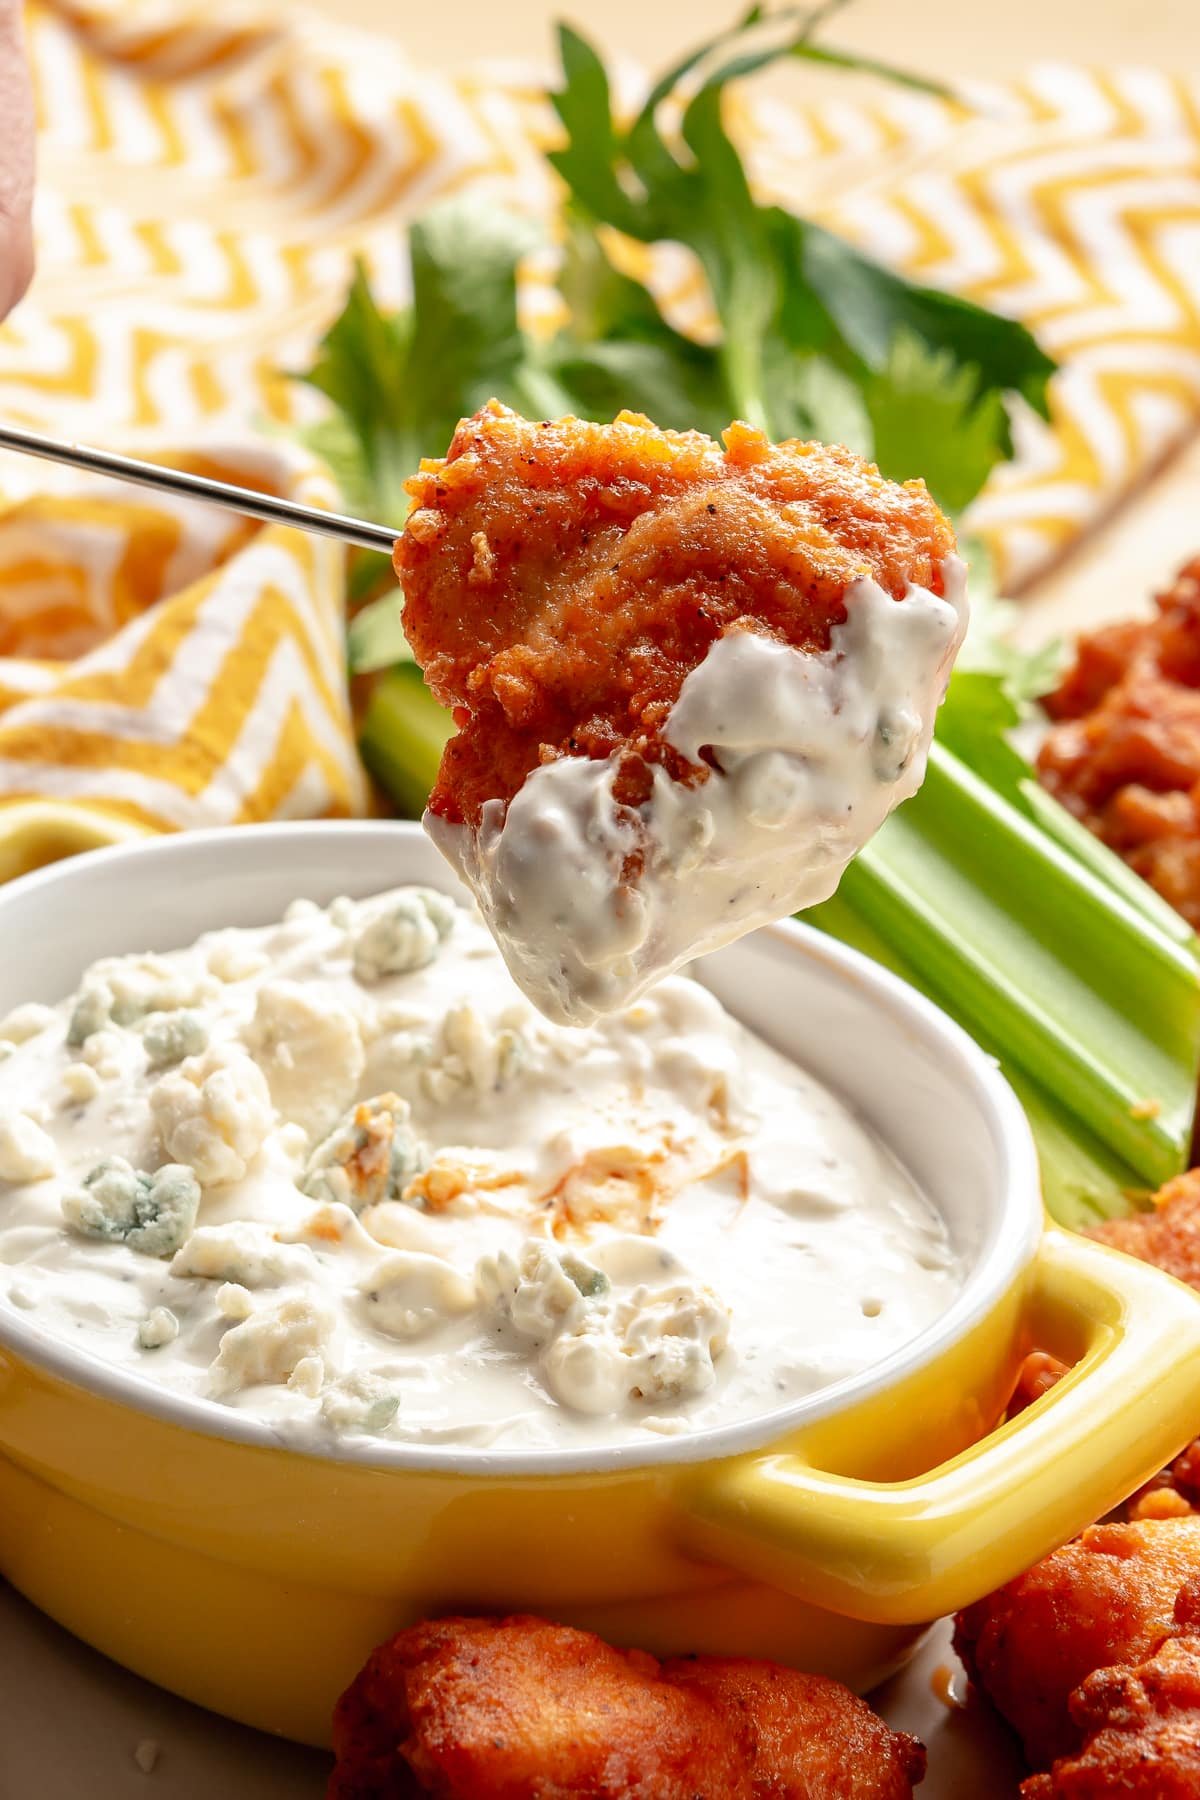 A hand is shown dipping a piece of breaded chicken into the blue cheese dip.